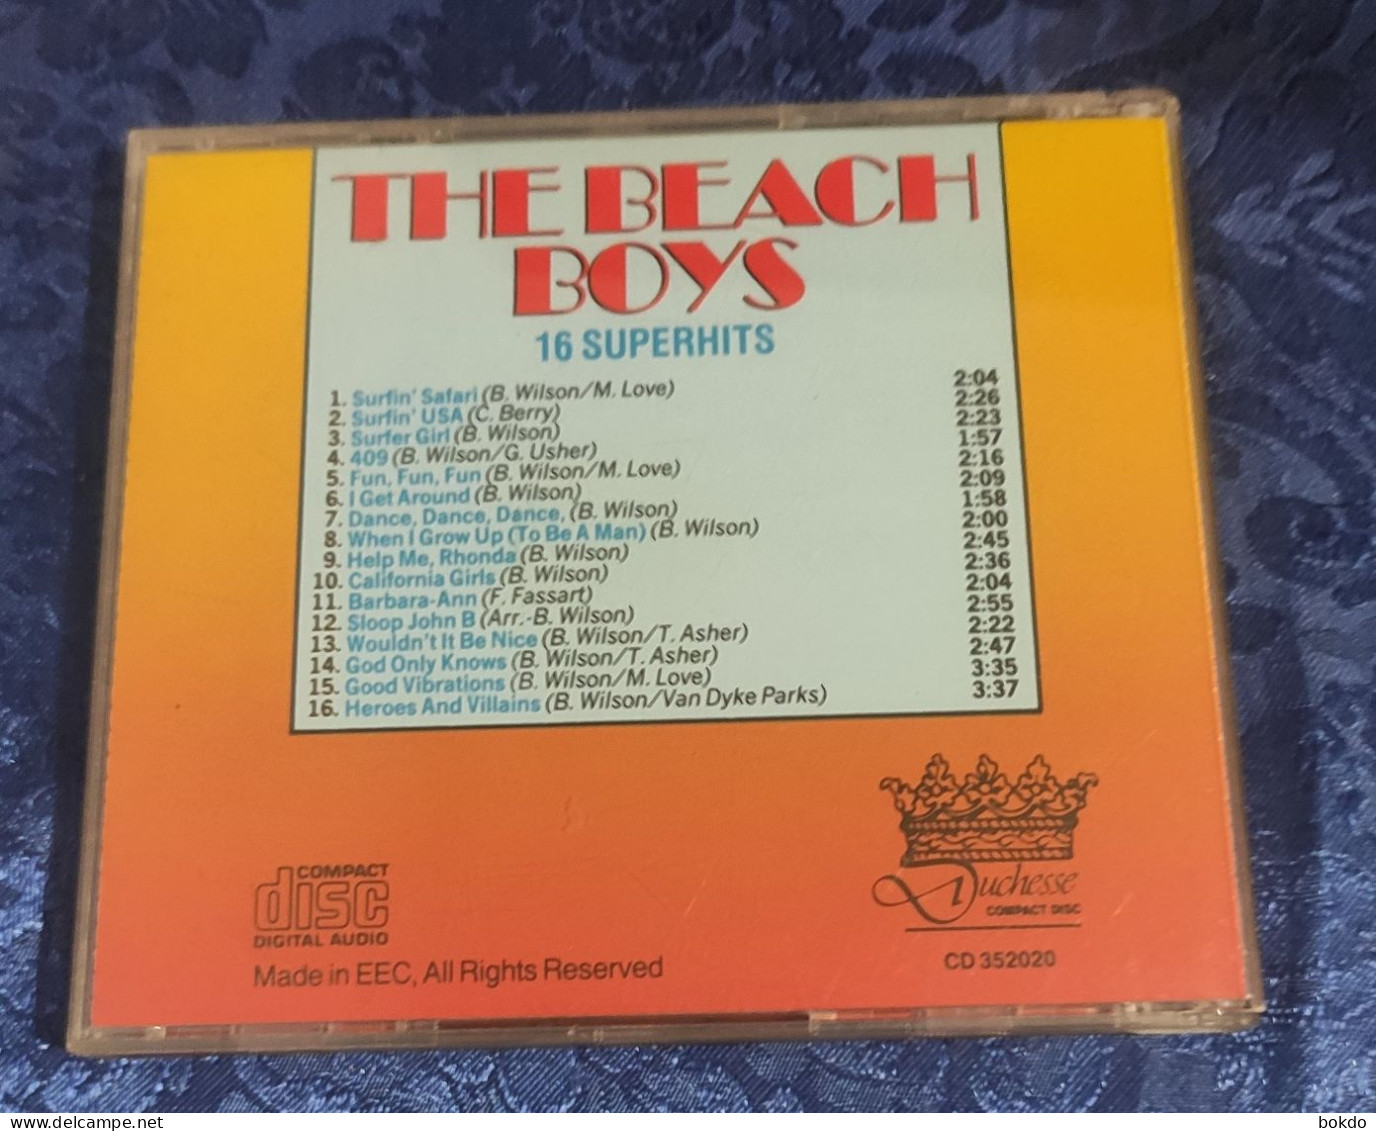 THE BEACH BOYS - 16 Superhits - Other - English Music